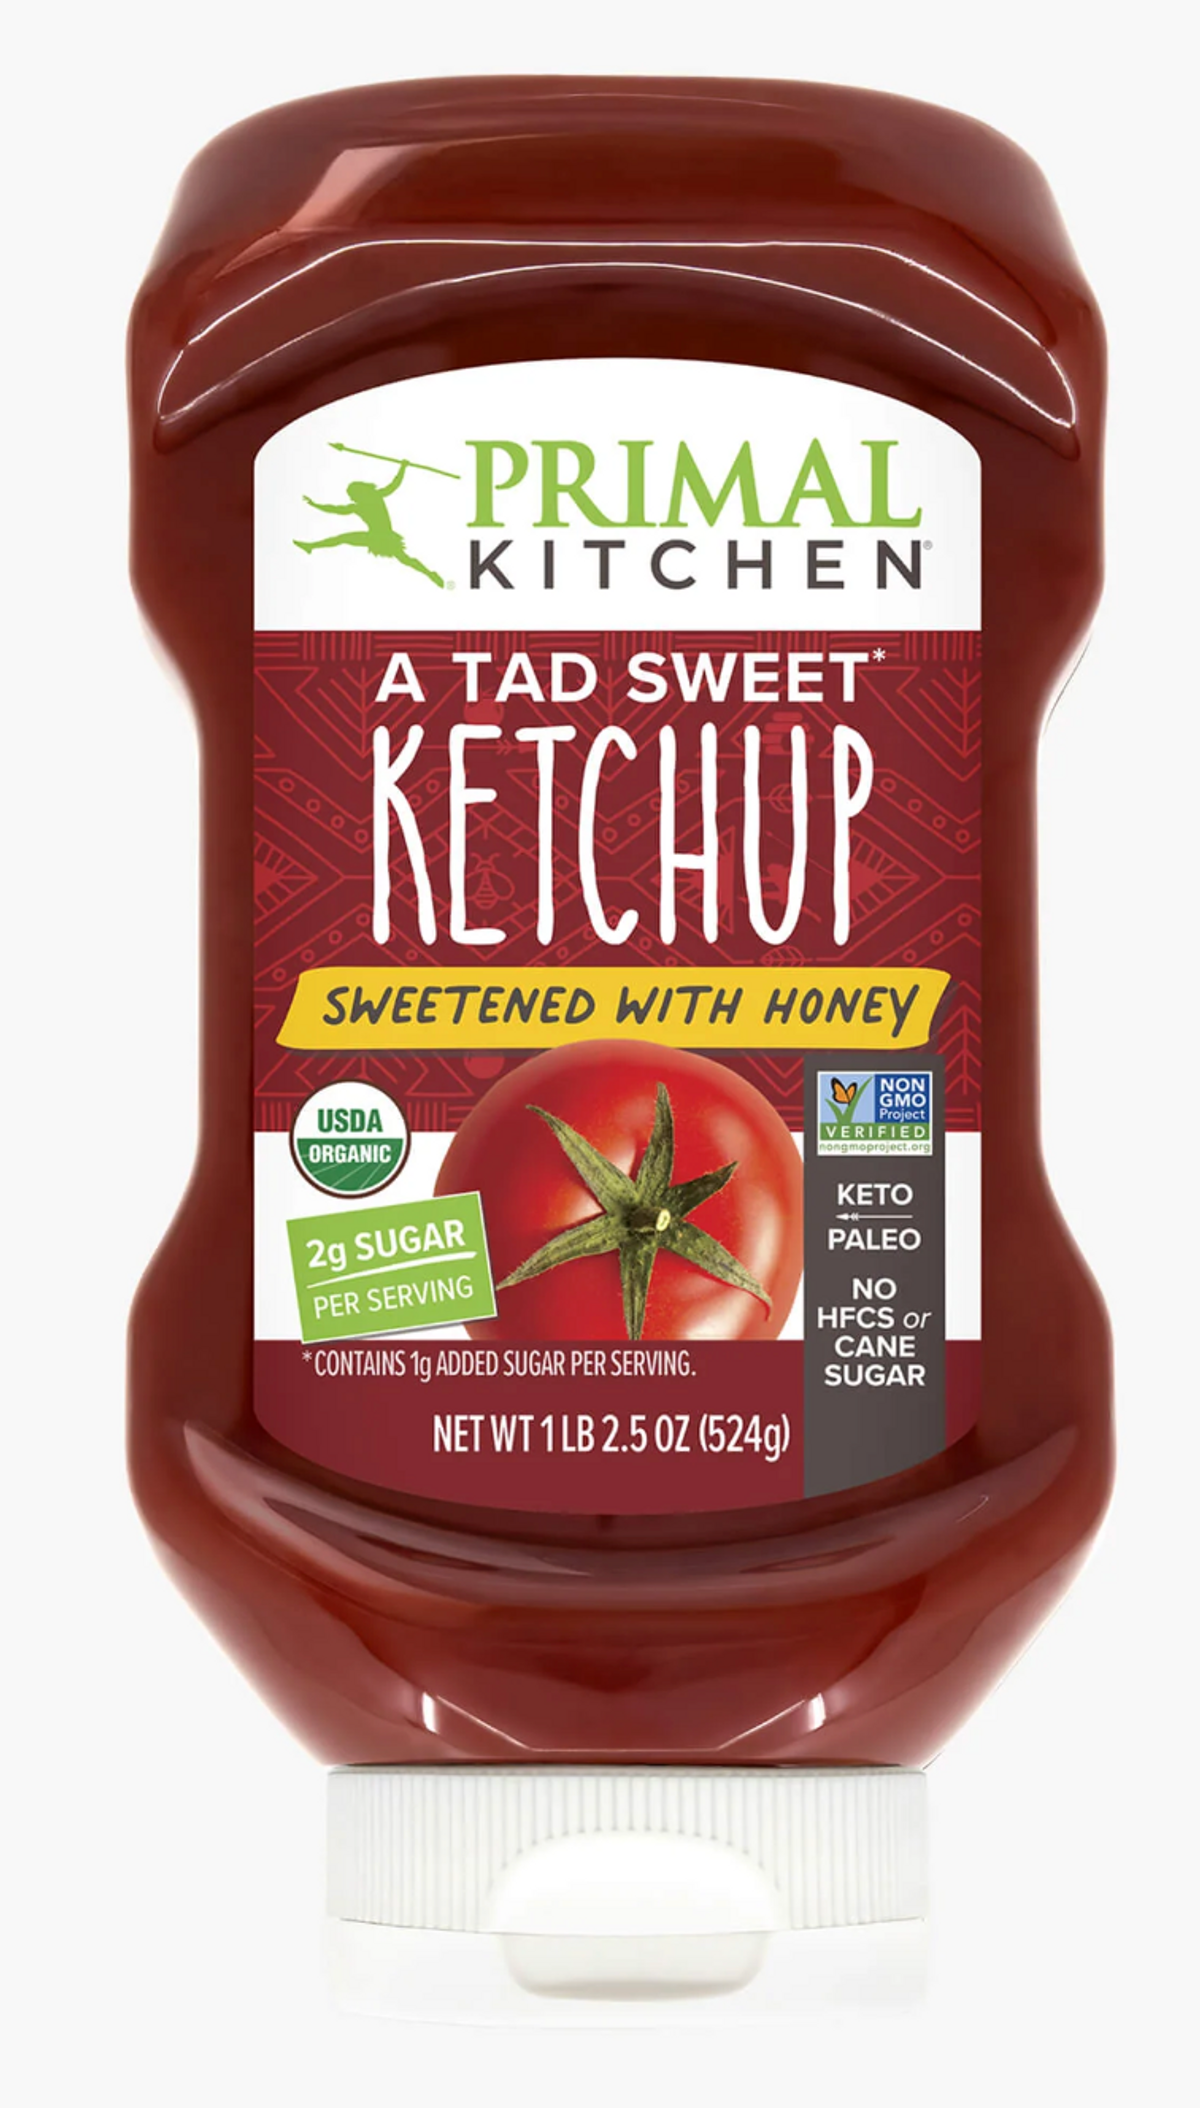 Primal Kitchen A Tad Sweet Ketchup (Sweetened with Honey)